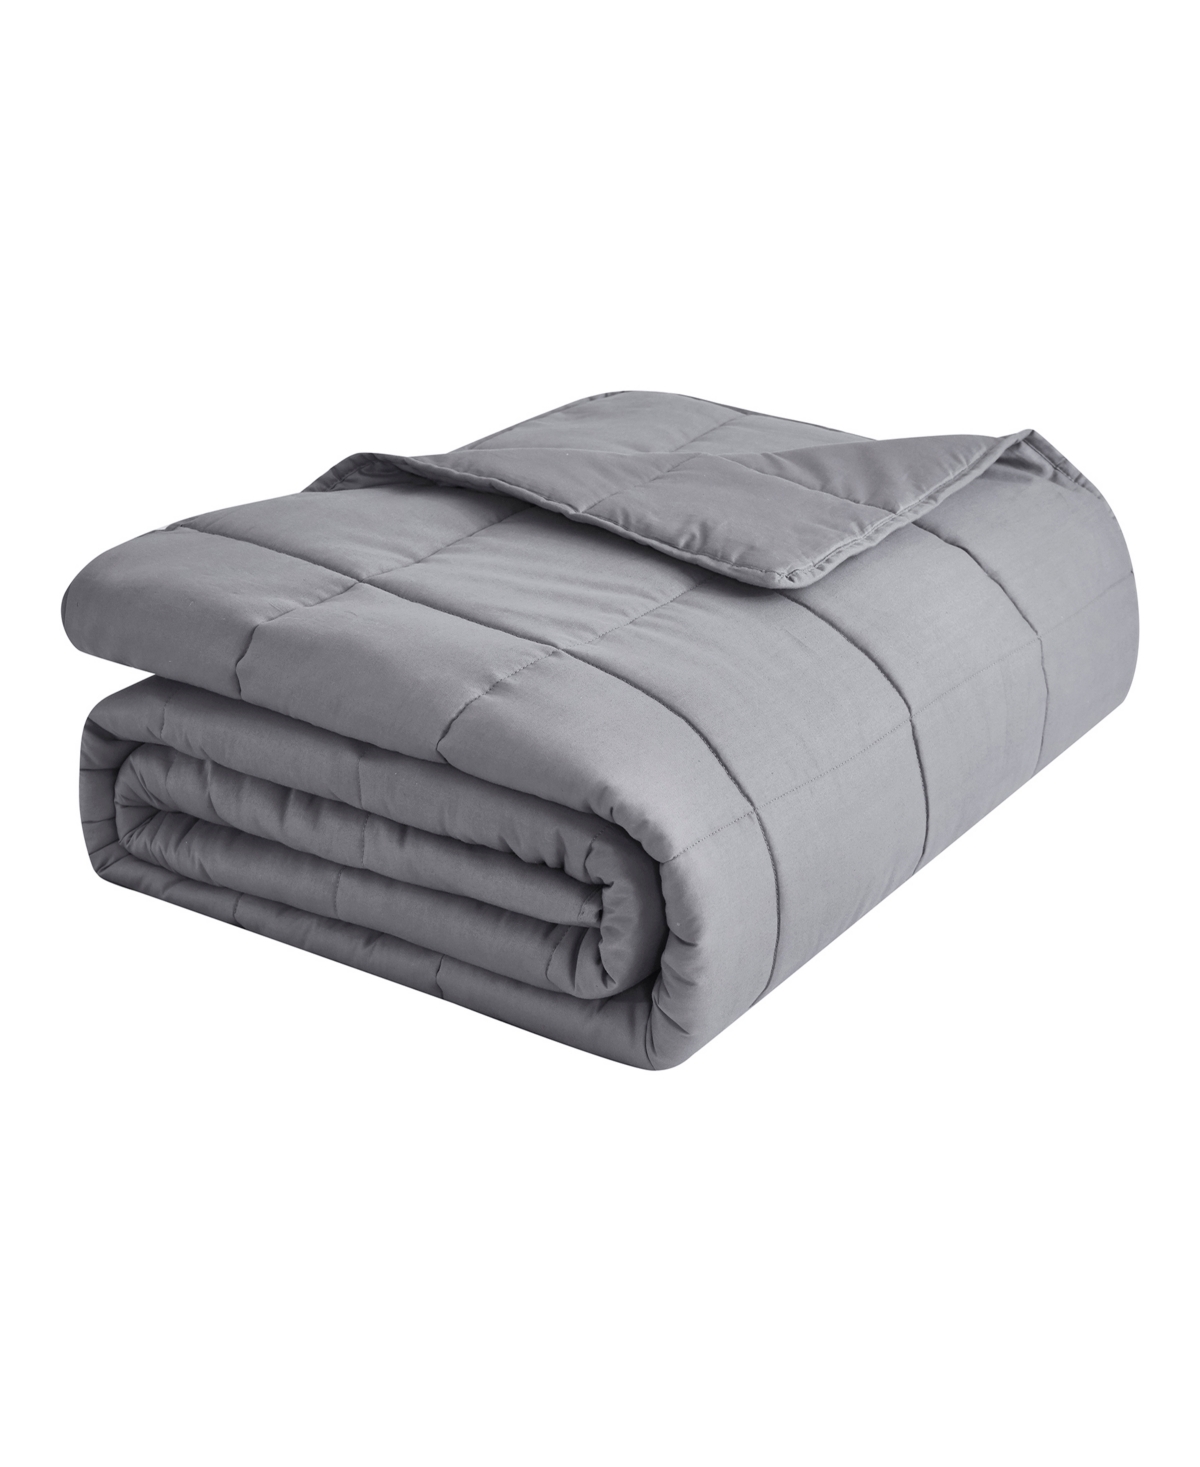 Dream Theory Cotton Weighted 20 Lbs Blanket, King In Gray